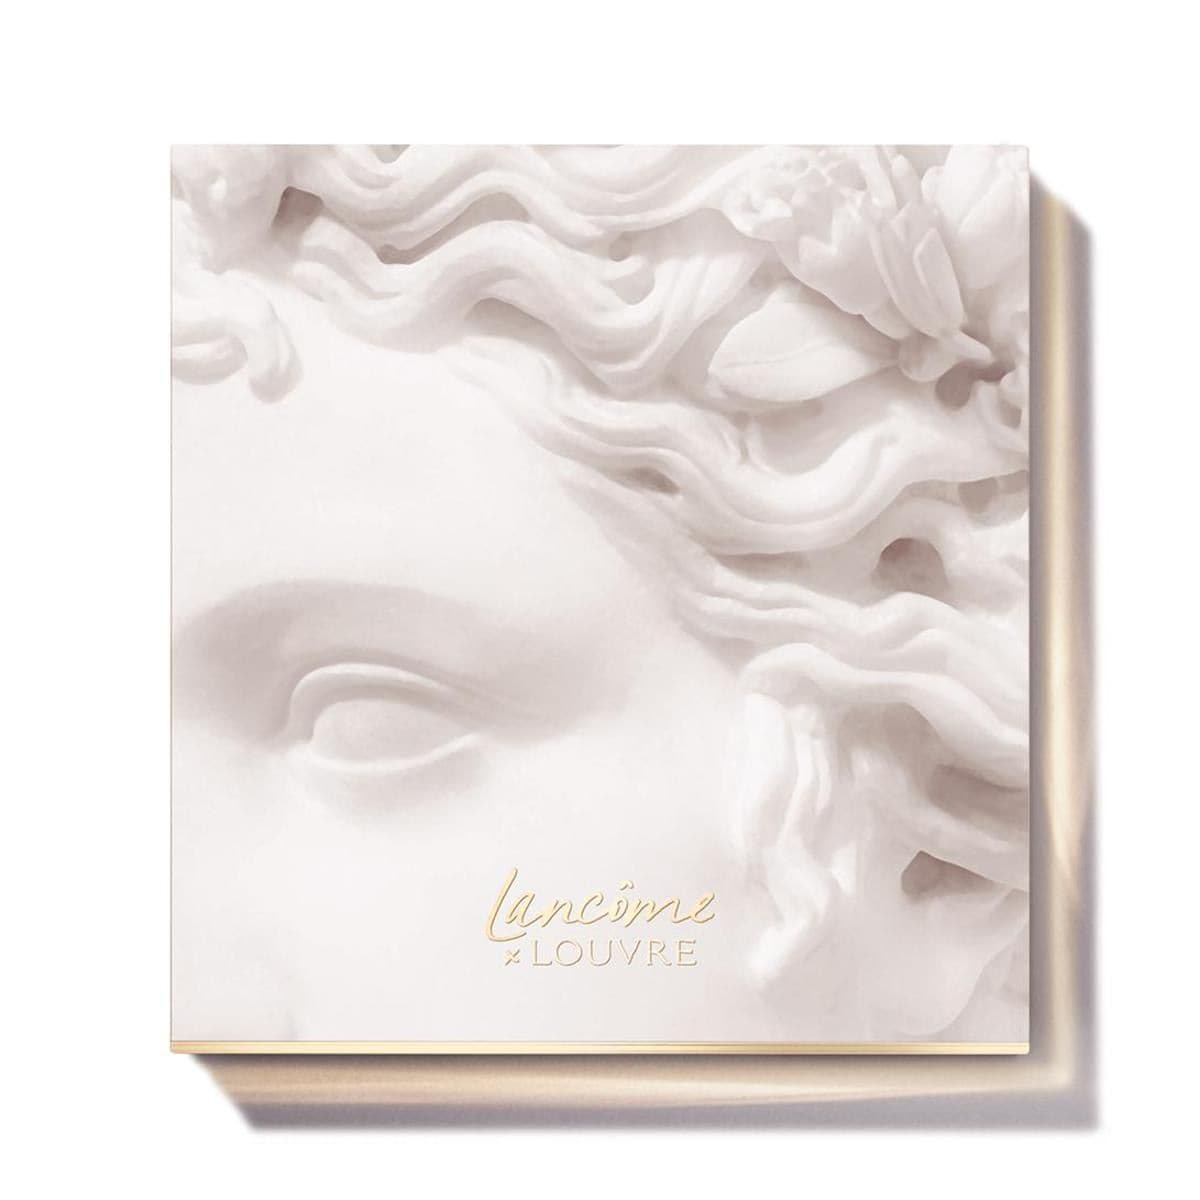 Lancôme and the Louvre fuse art and beauty in a groundbreaking collaboration